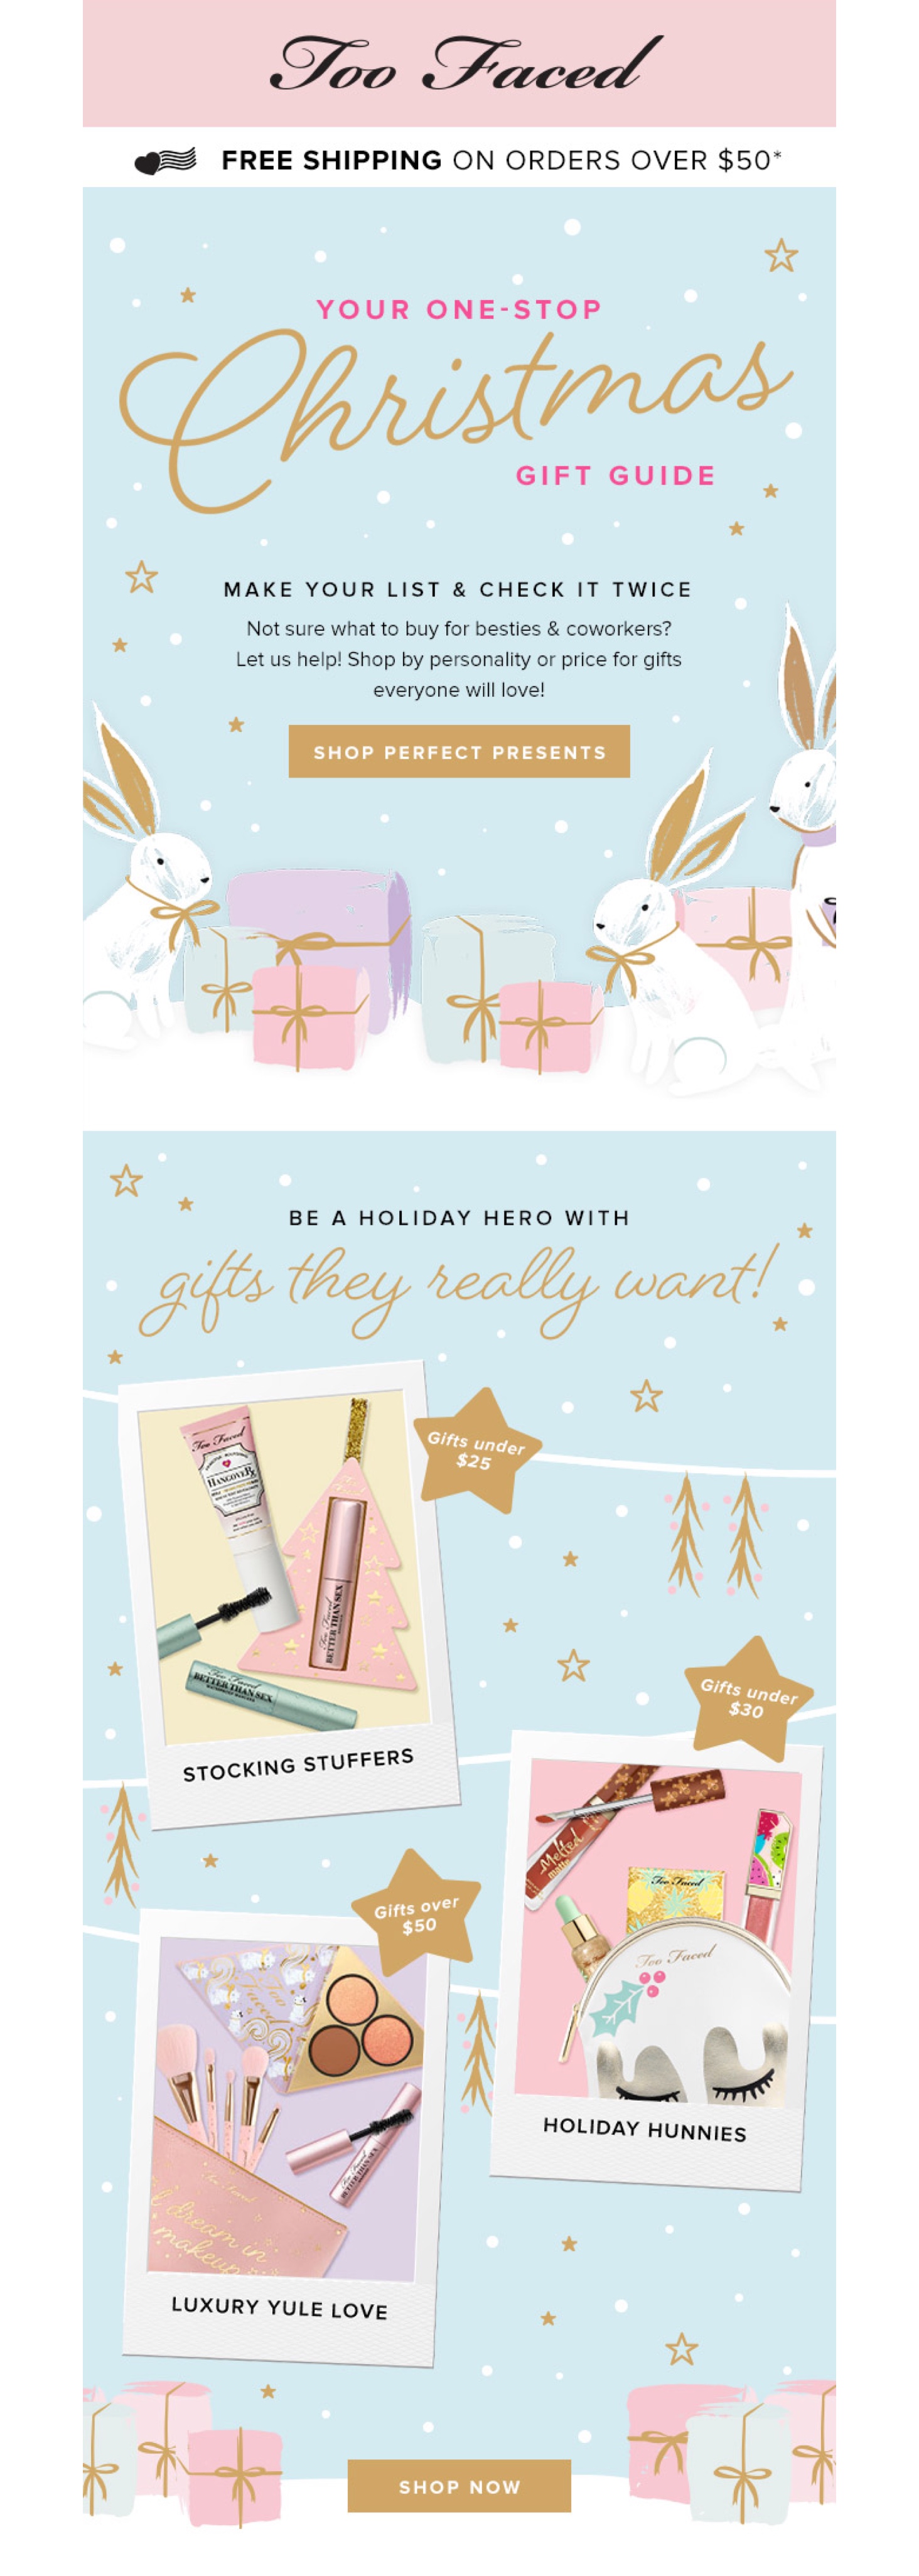 Too Faced Gift Guide